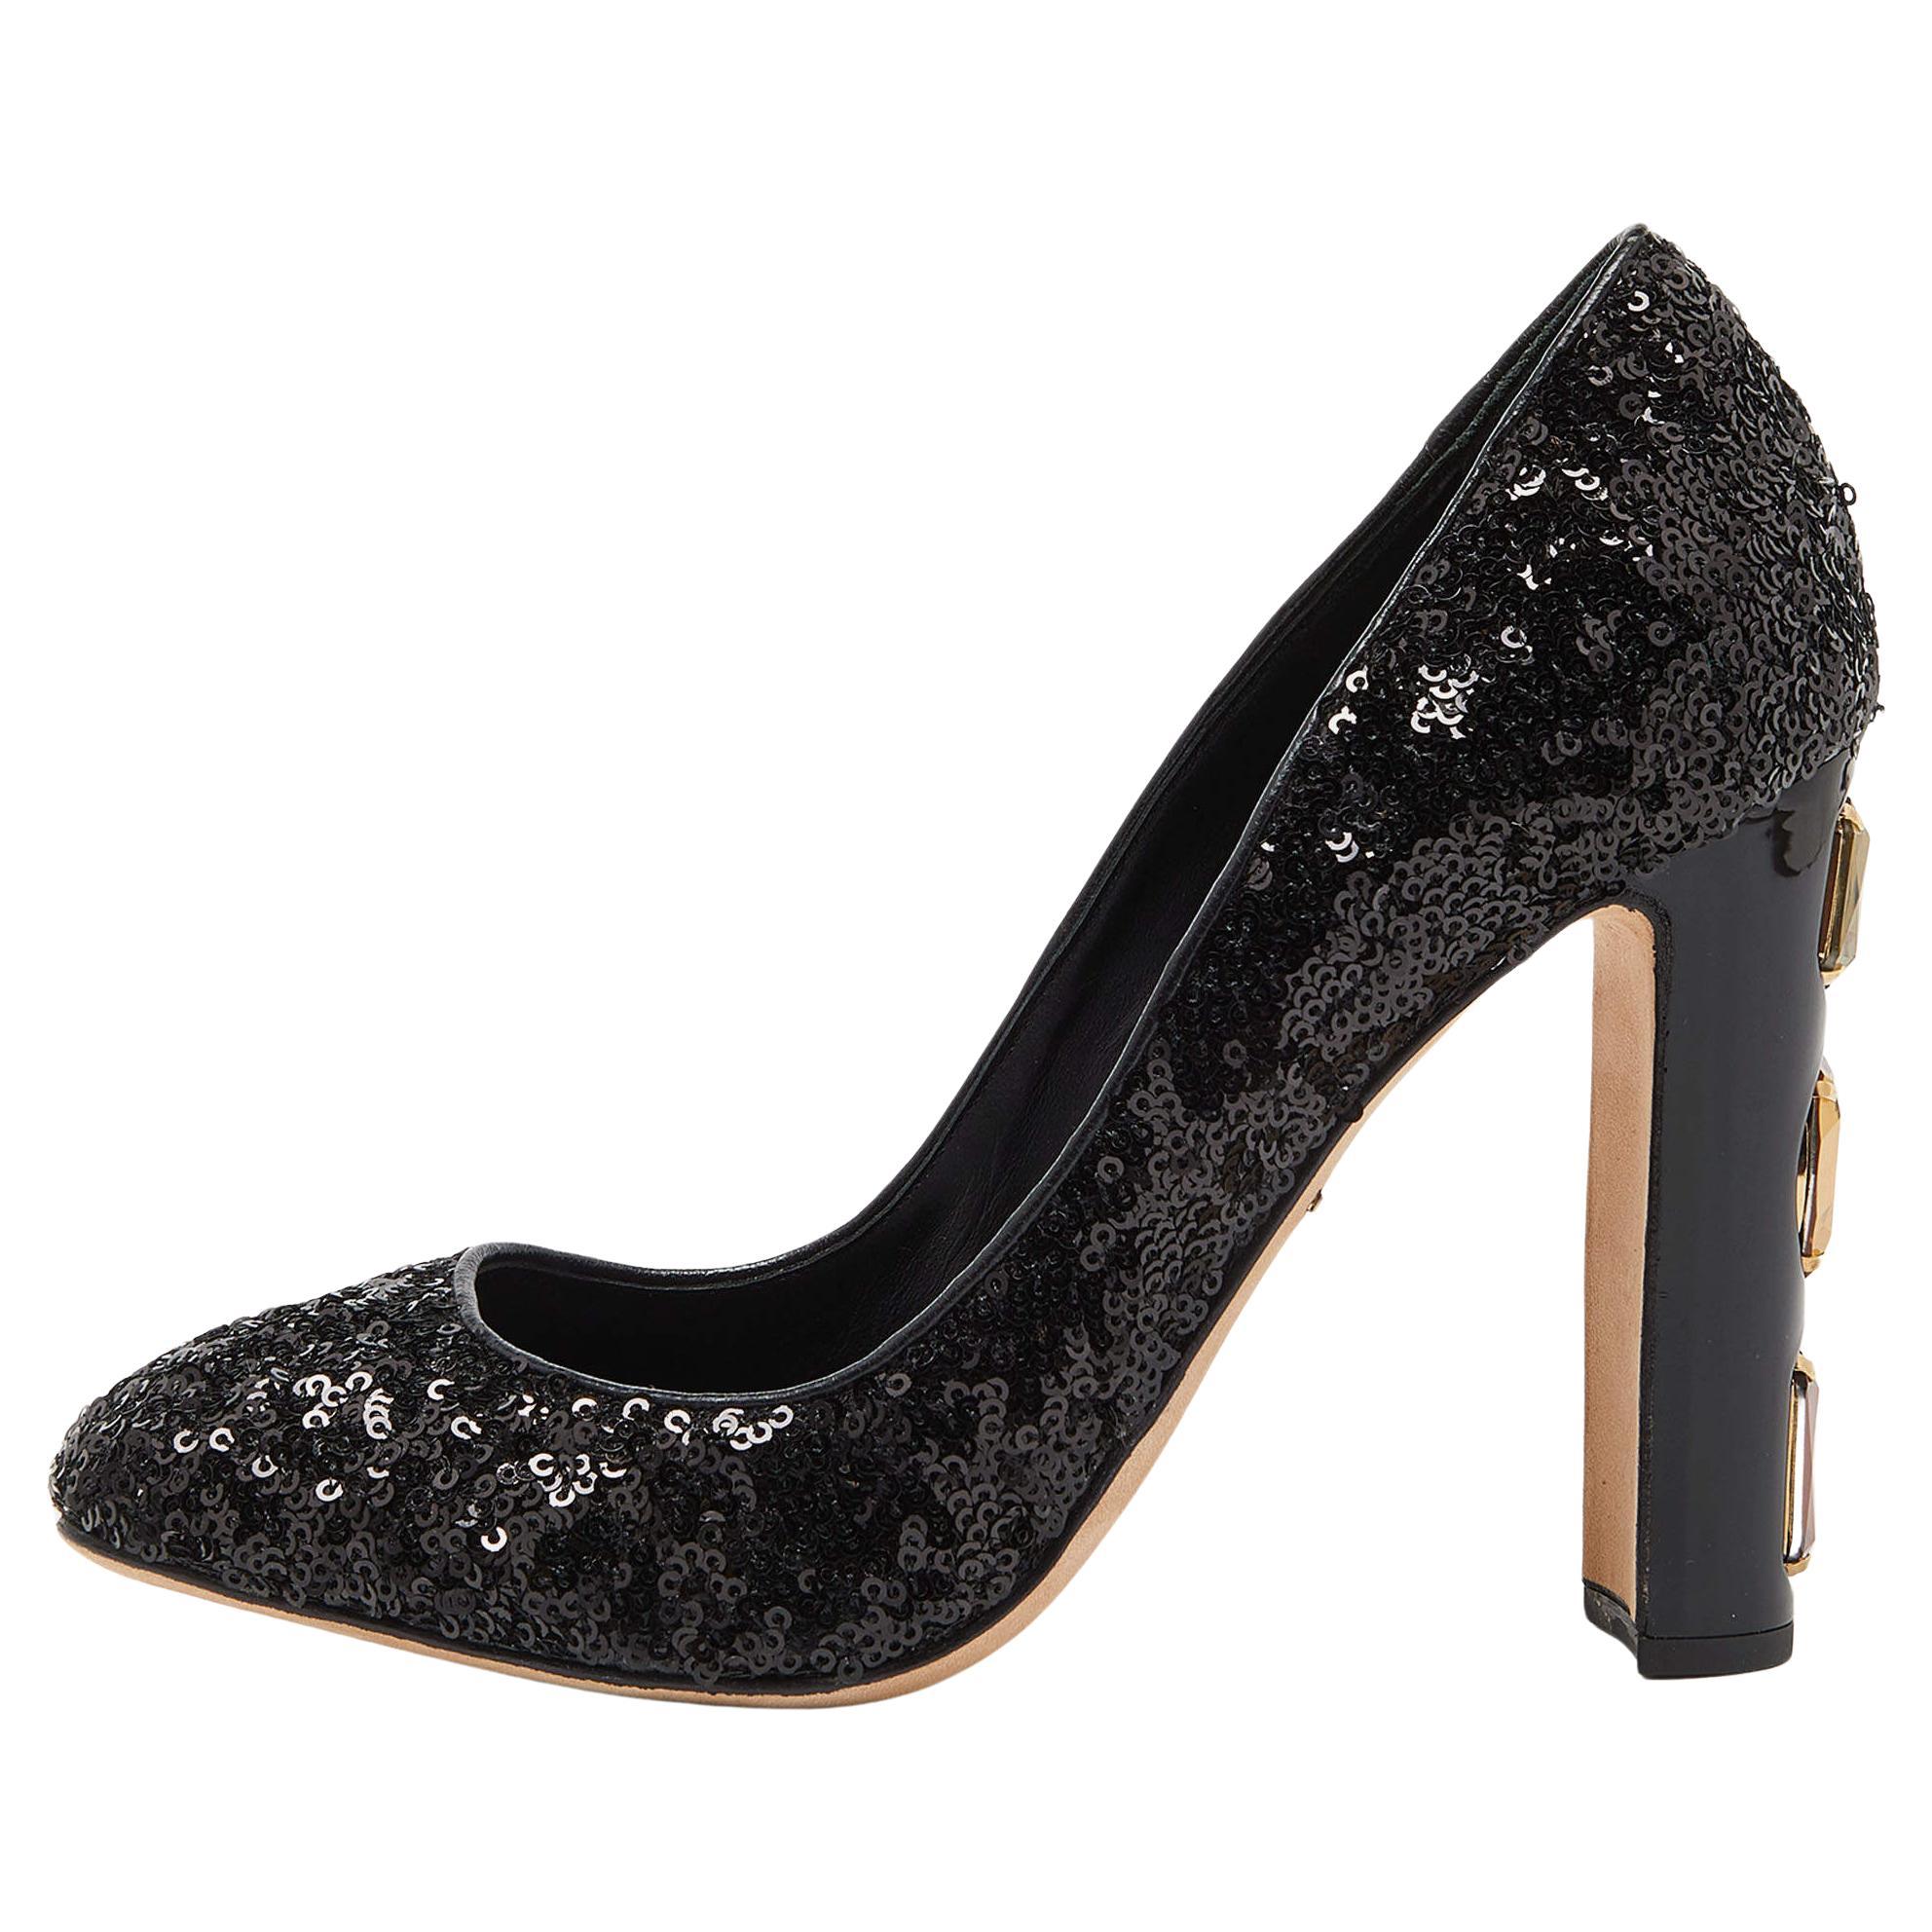 Dolce & Gabbana Black Sequins and Leather Block Heel Pumps Size 37.5 For Sale